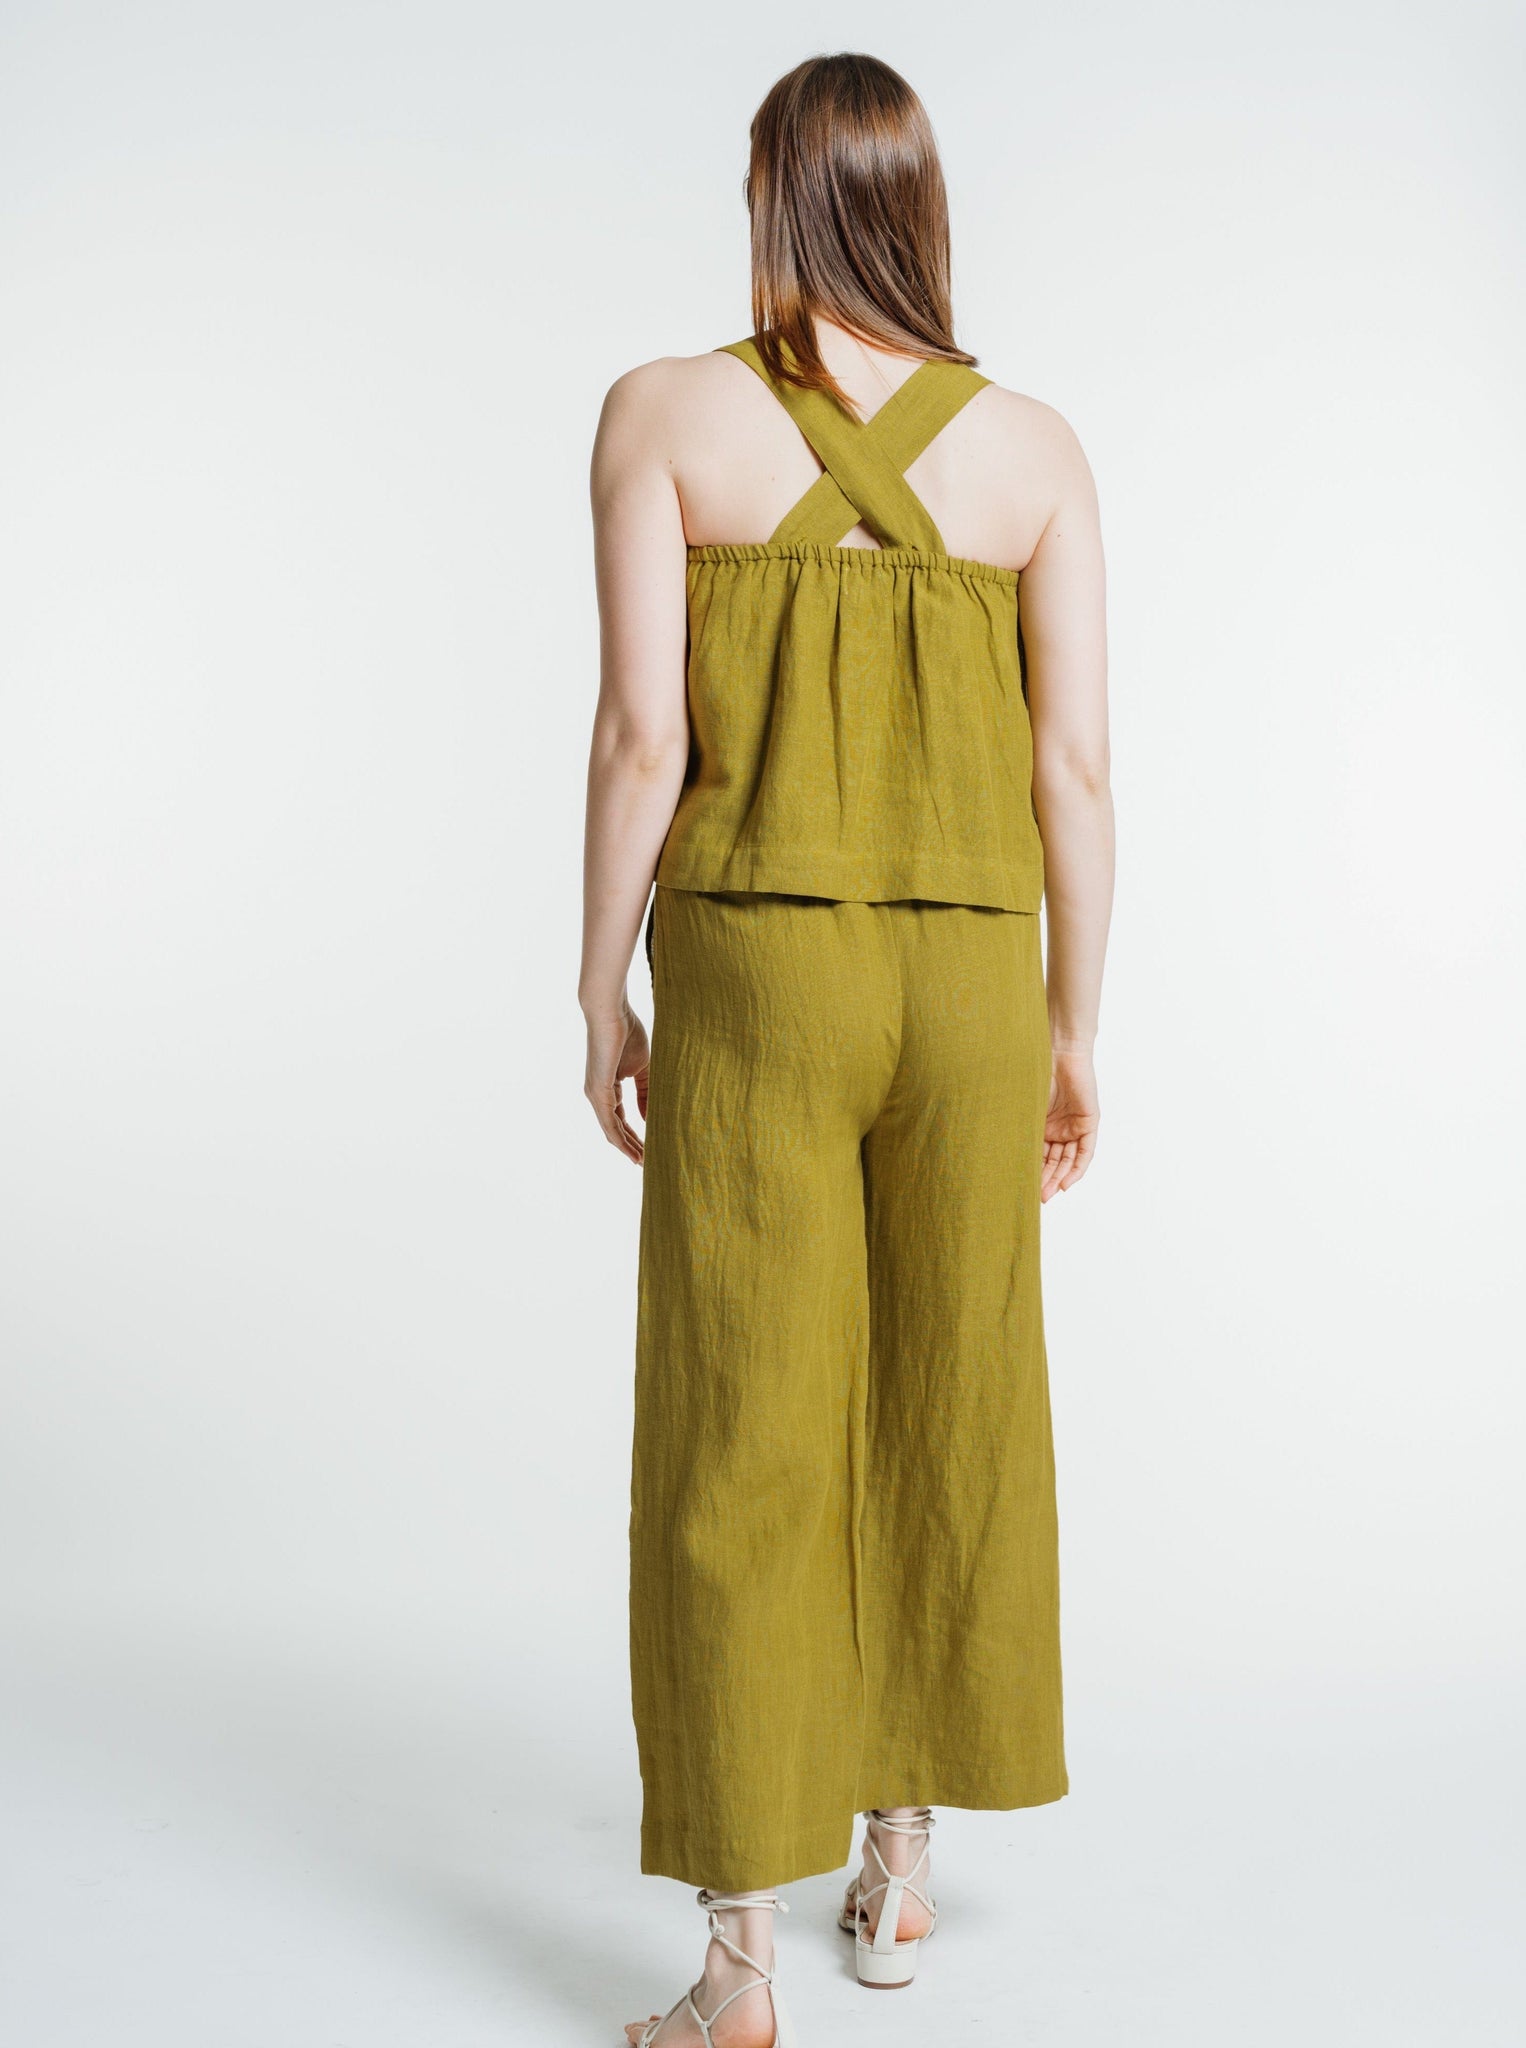 The back view of a woman wearing an Everyday Crop - Dried Tobacco jumpsuit.